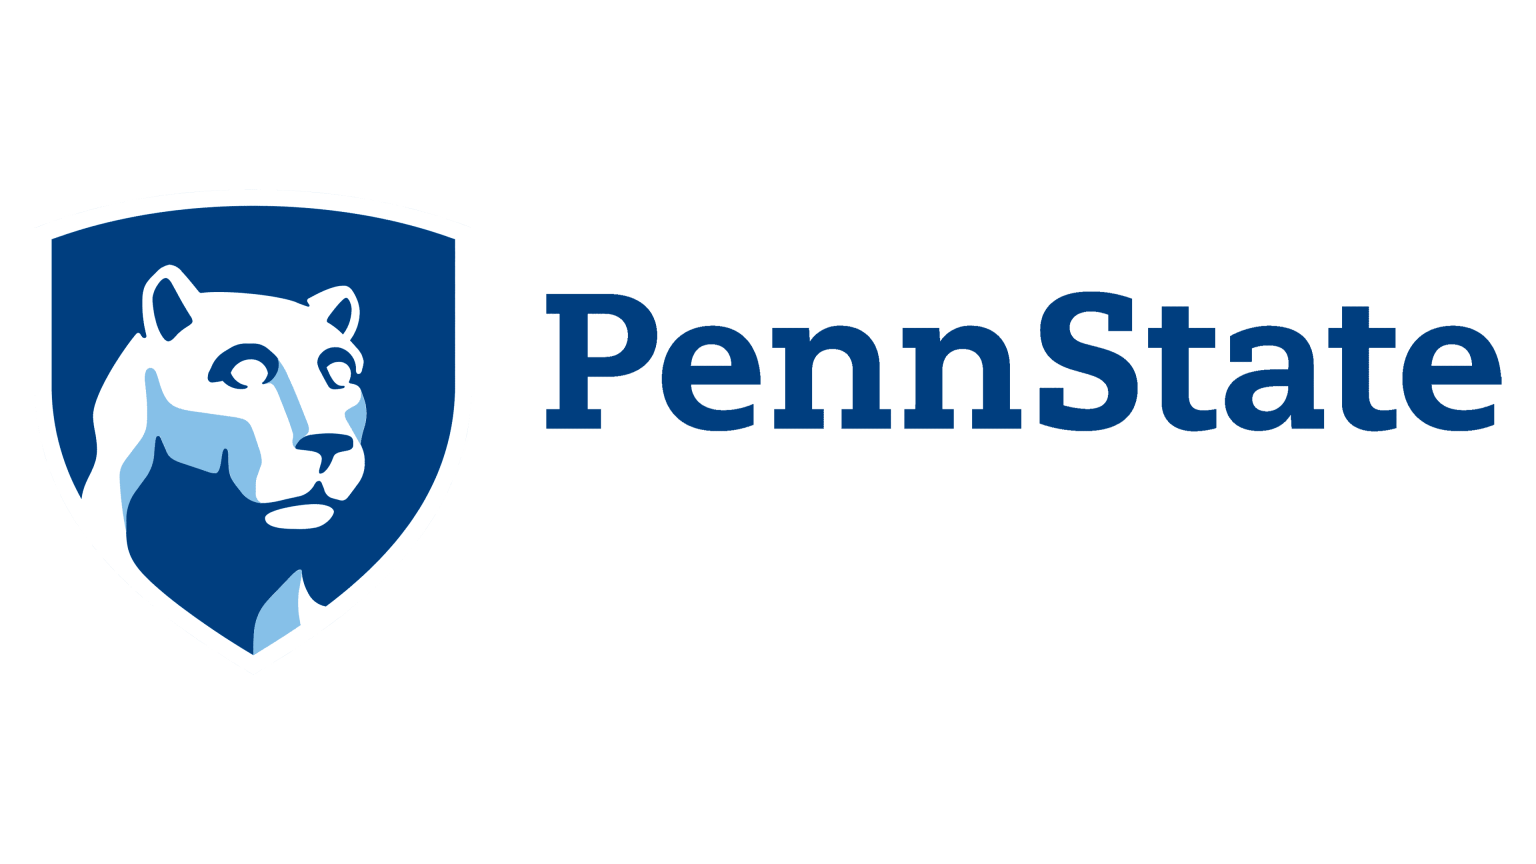 Penn State University Logo and symbol, meaning, history, sign.